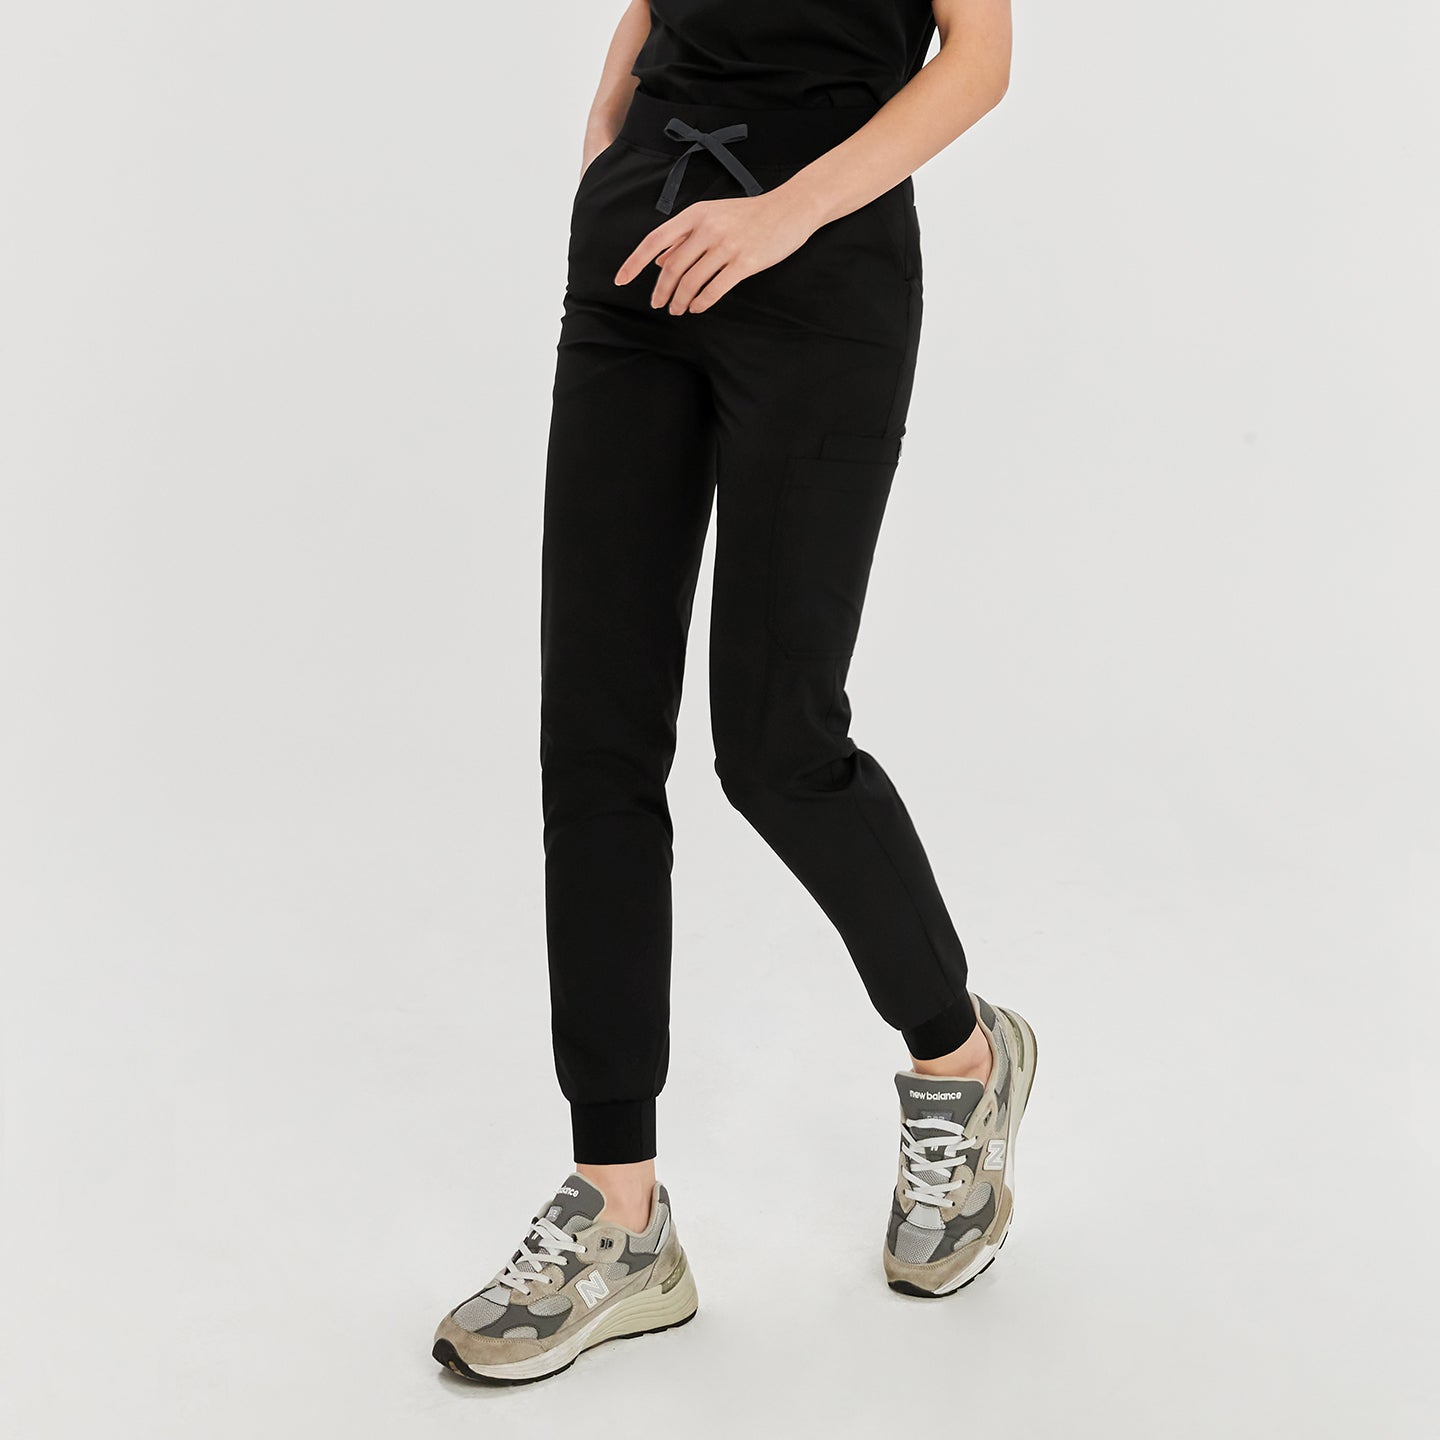 Eco-friendly black jogger scrub pants with front pockets, featuring a gray drawstring for a comfortable fit and practical style,Eco Black